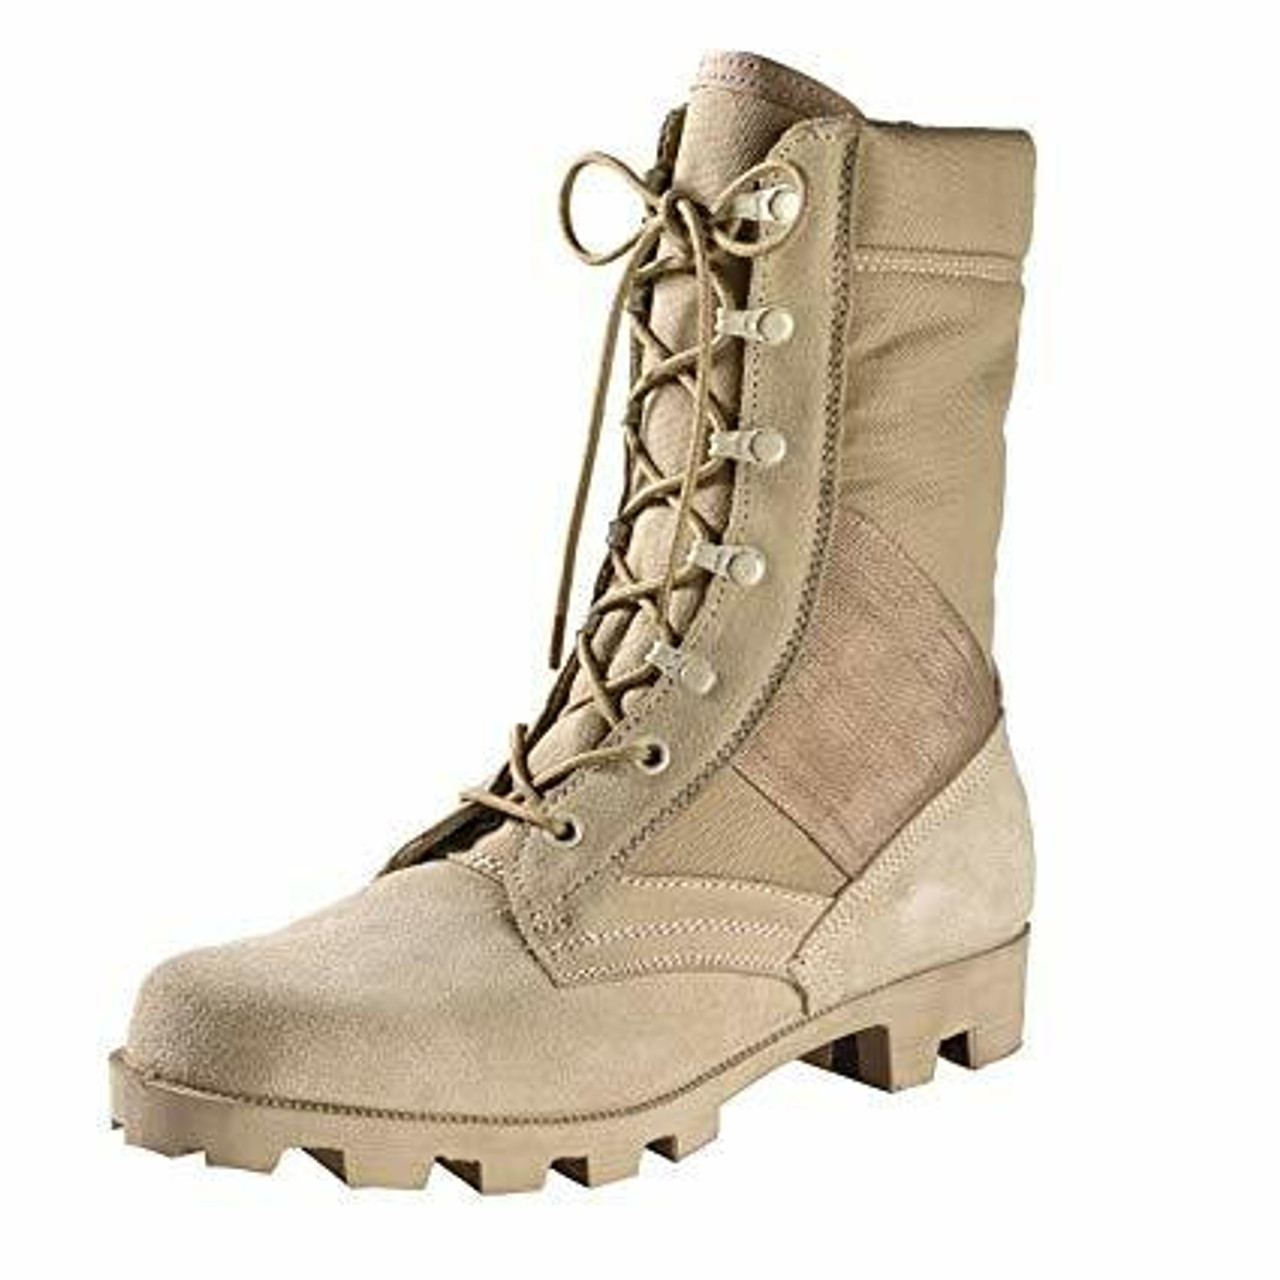 tan boots military